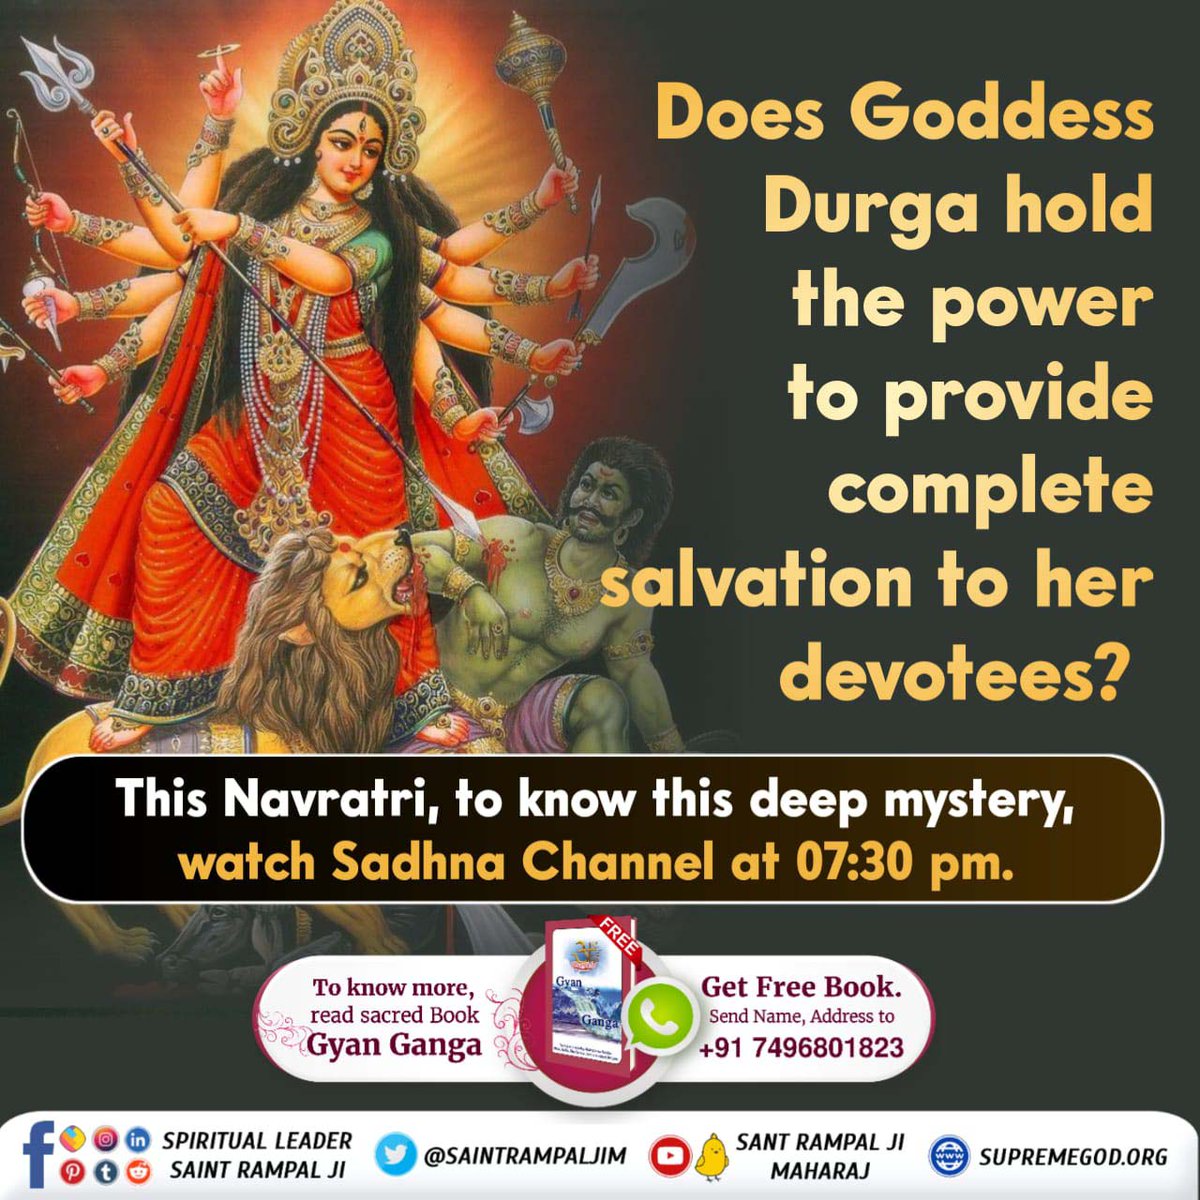 #भूखेबच्चेदेख_मां_कैसे_खुश_हो
Can Goddess Durga cure the incurable disease of her devotee and also increase his/her life? 
📌To know this deep secret, must read the 🆓 book #GyanGanga 
#FridayFeeling #fridaymorning #fridayevening #FridayMotivation #Navratri #Navratri2024